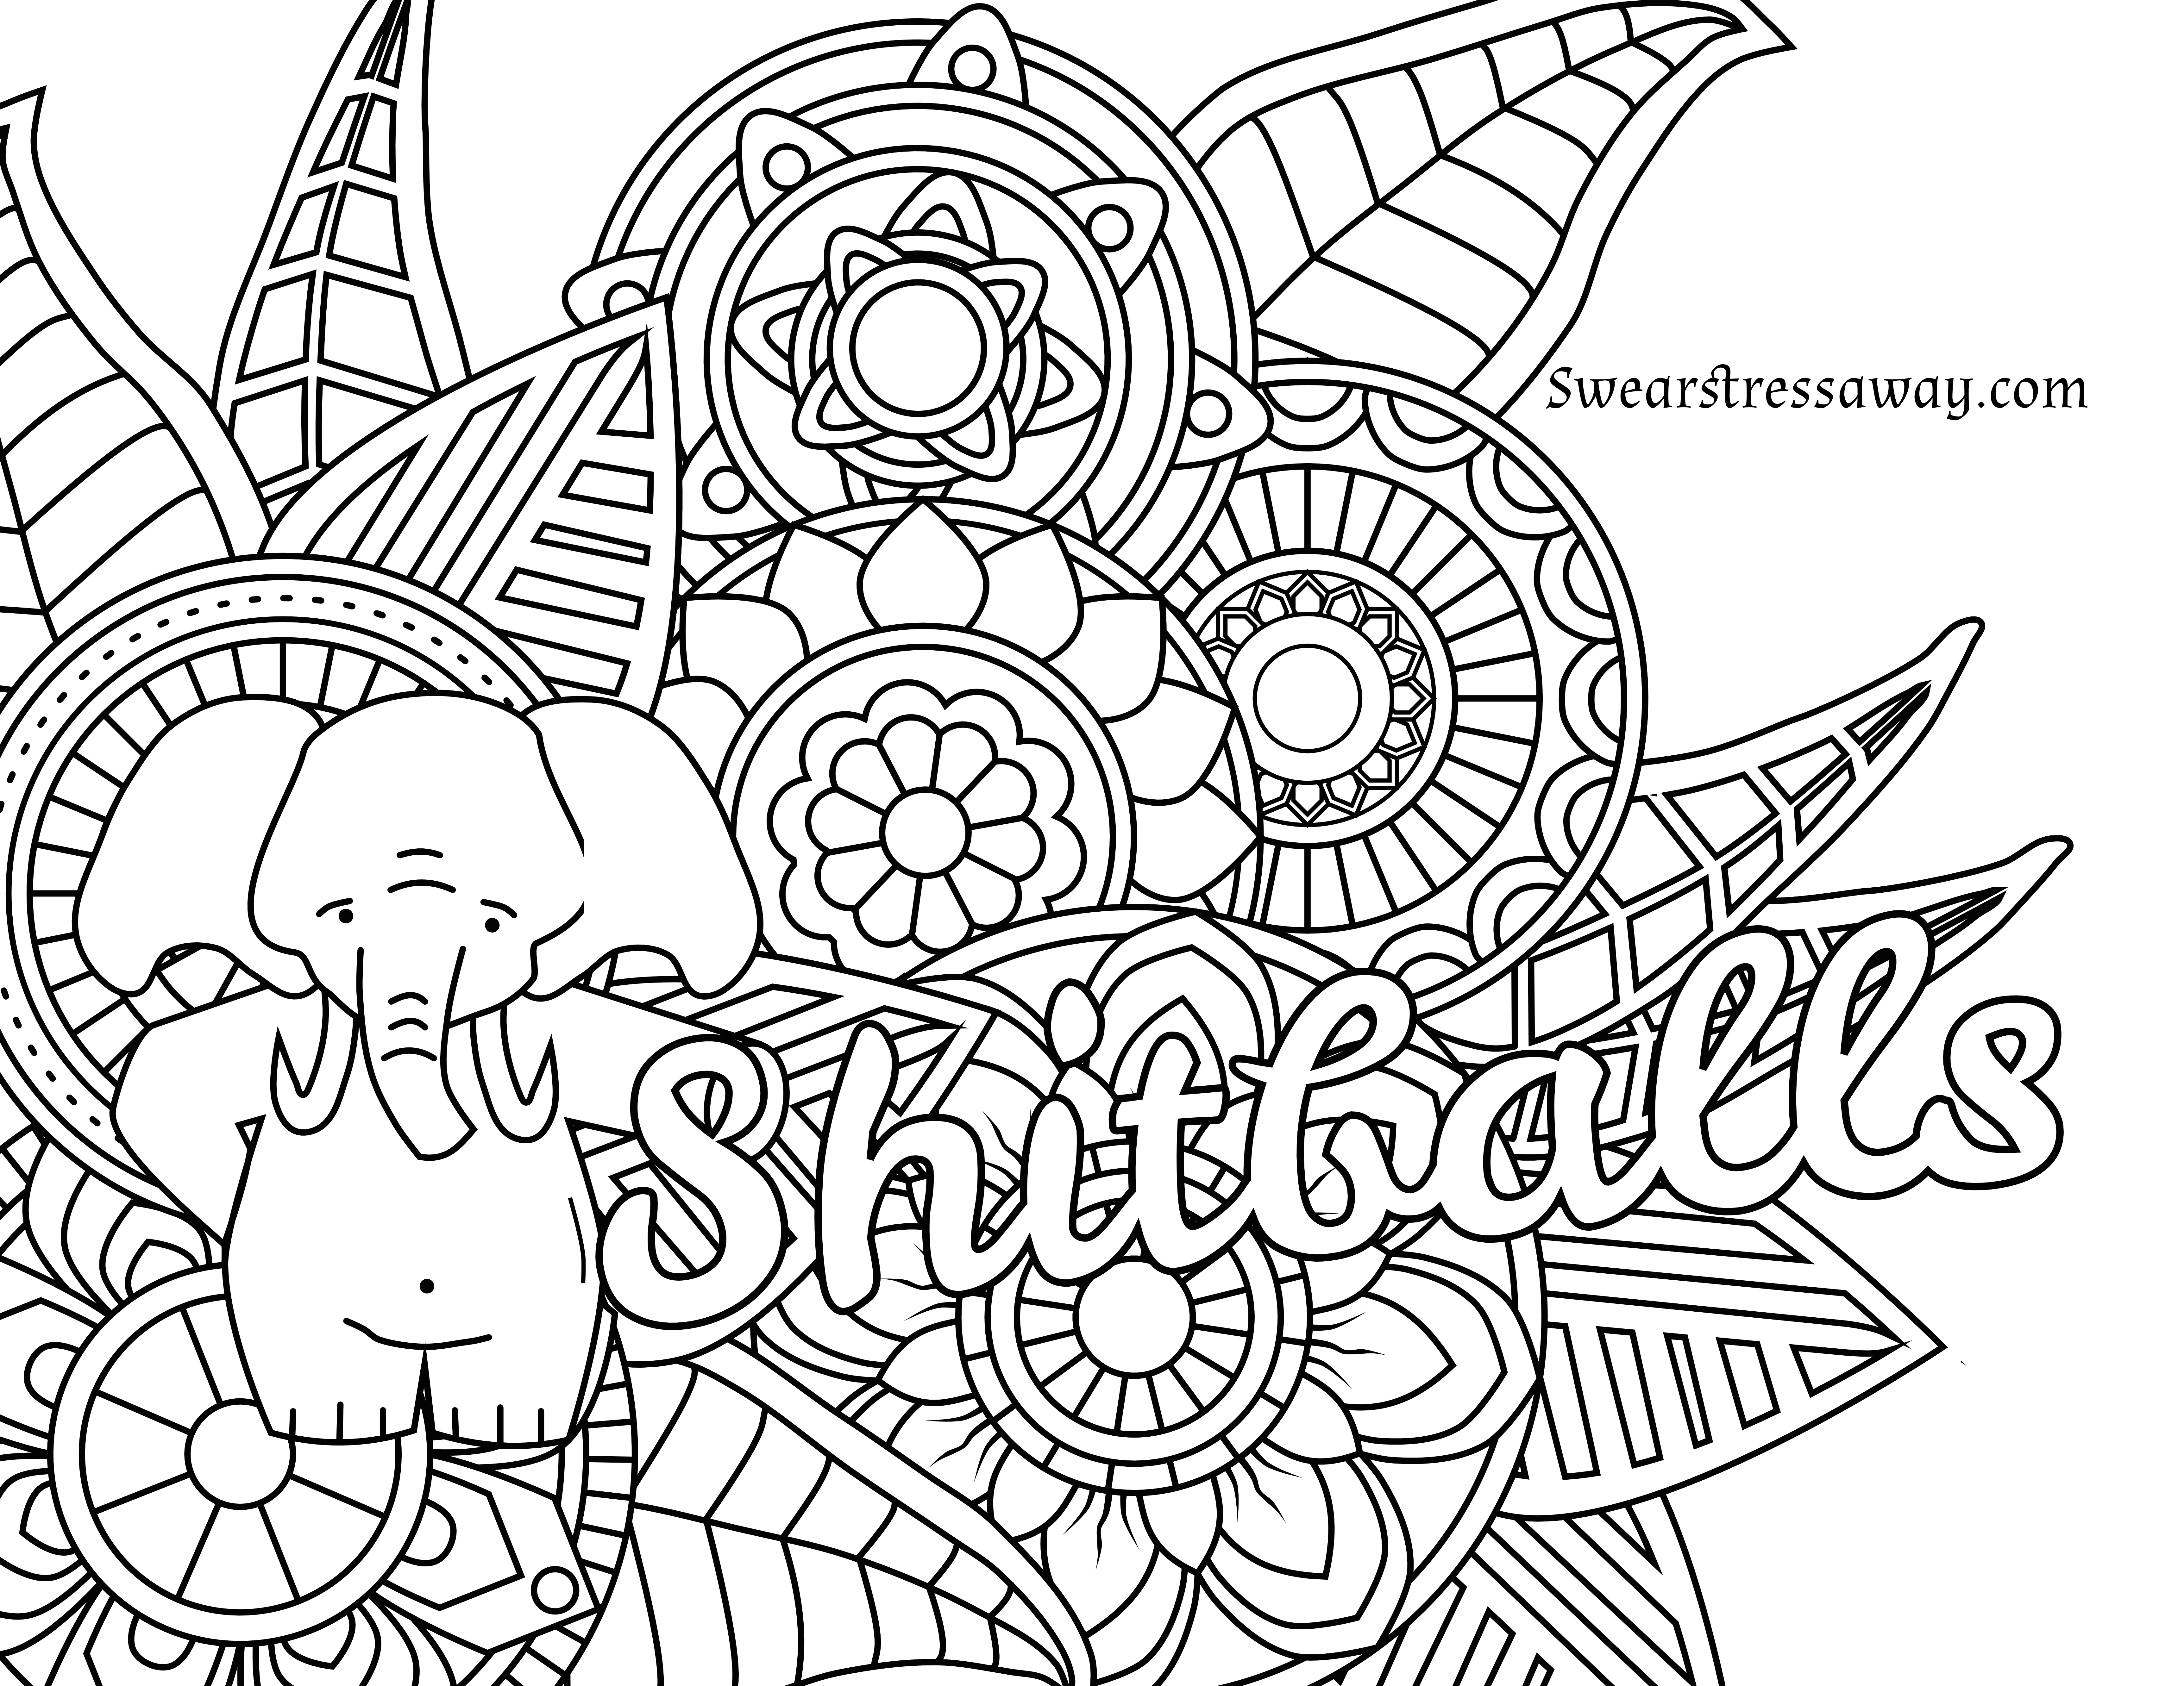 Coloring Pages : Free Printable Coloring Pages Adults Quotes For - Free Printable Coloring Sheets